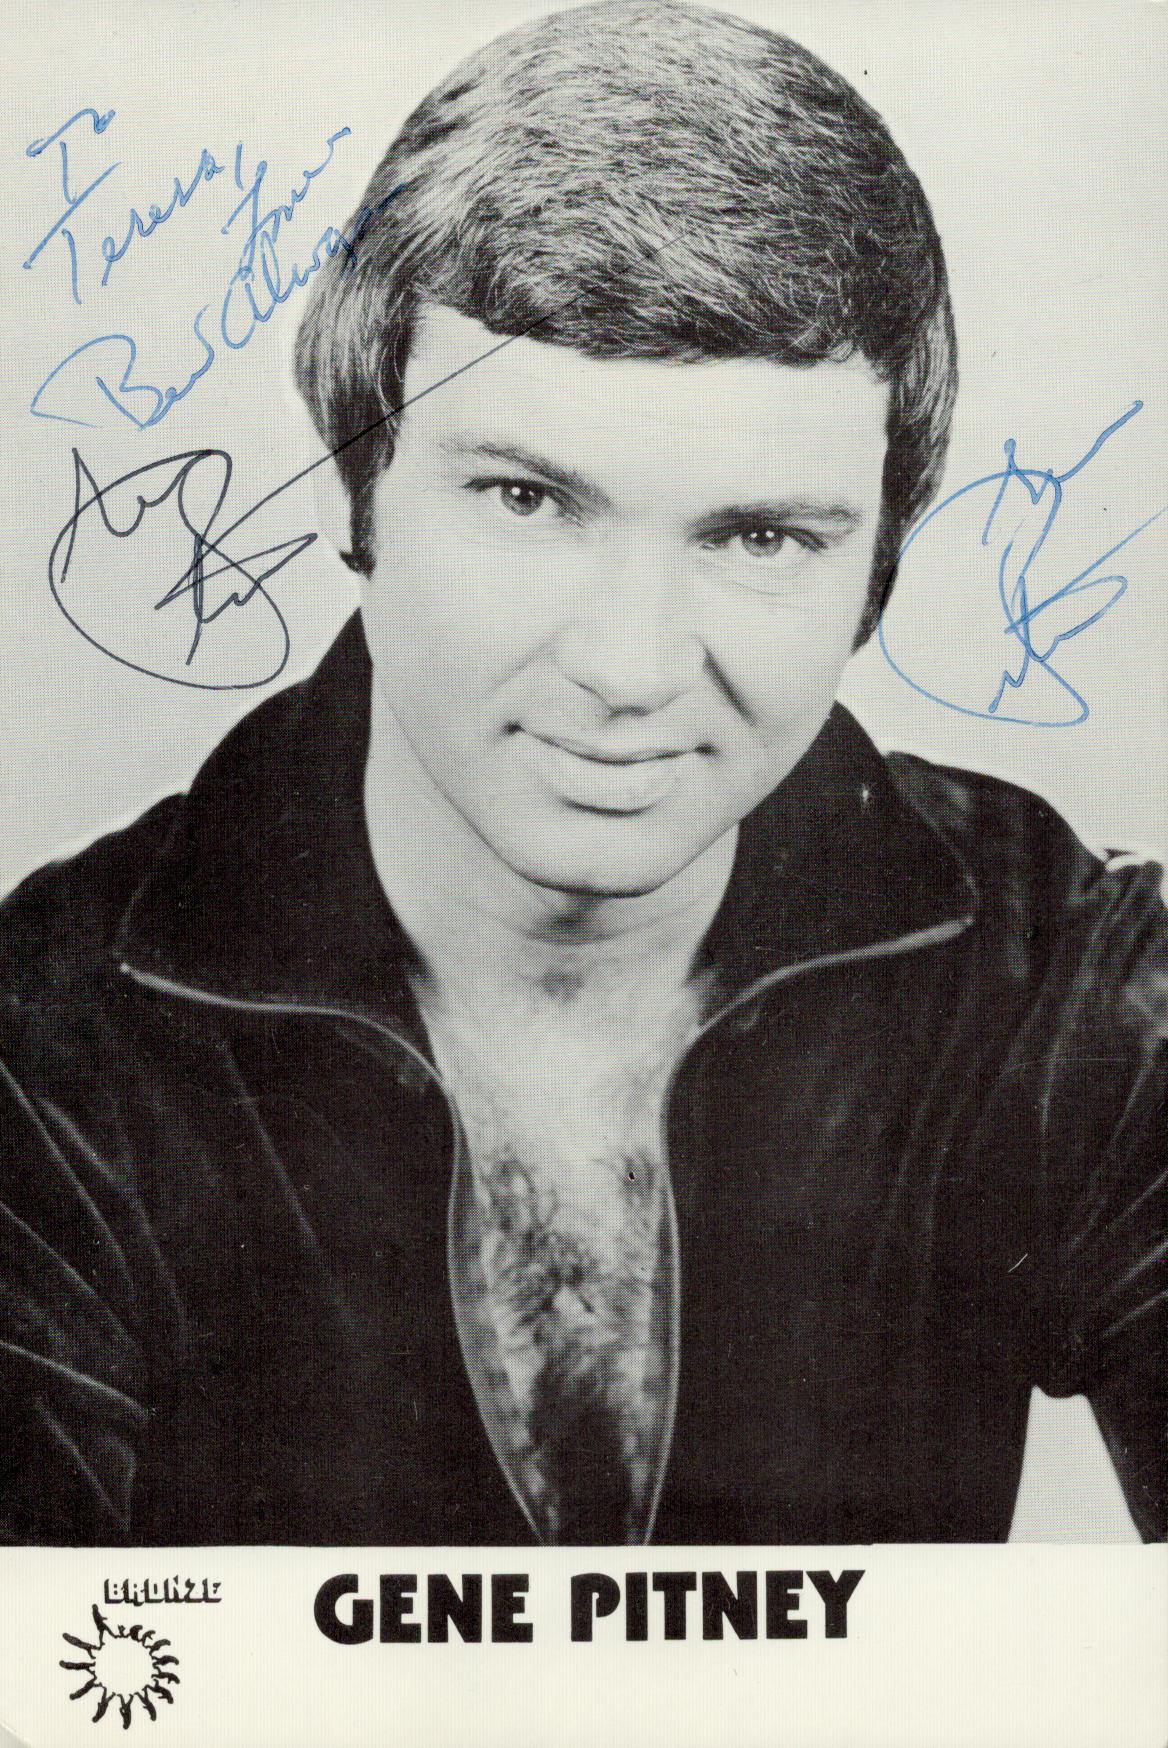 Music Gene Pitney signed 6x4 inch black and white photo. Pitney was an American singer songwriter